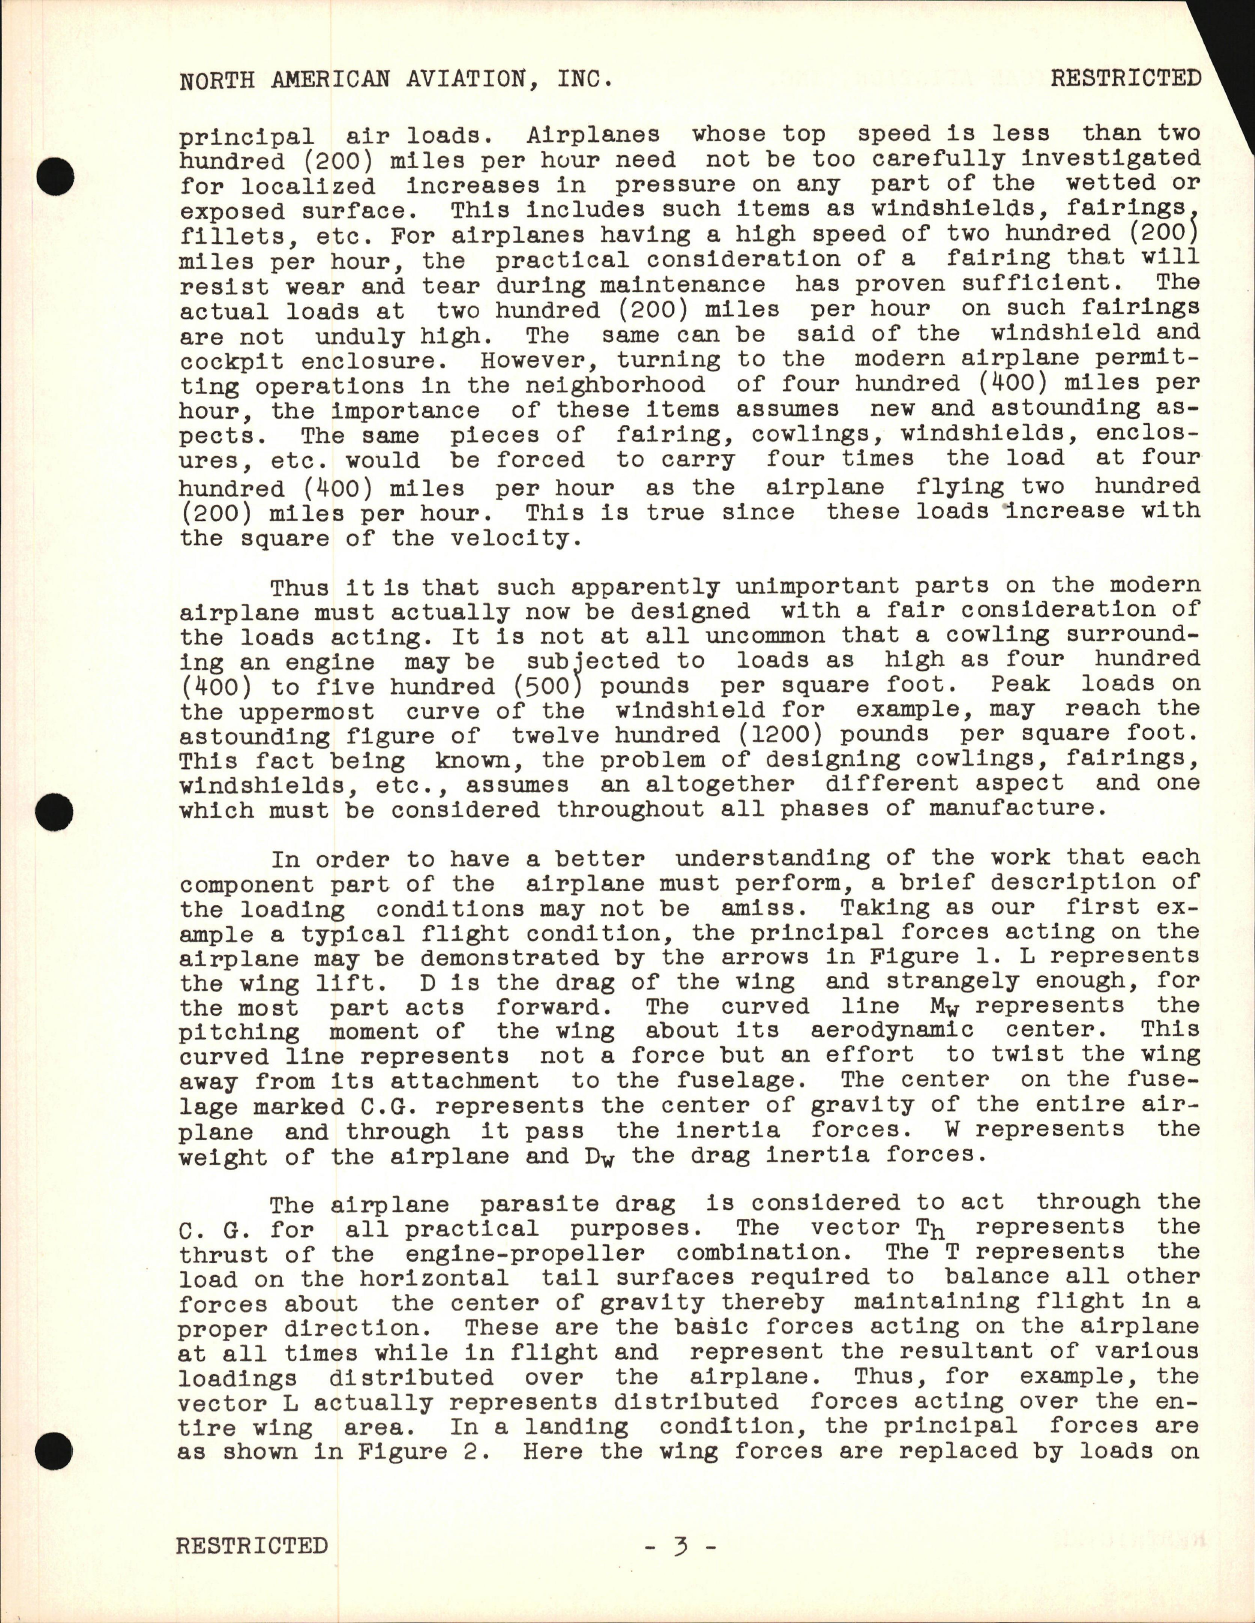 Sample page 7 from AirCorps Library document: Service School Lectures - Structures